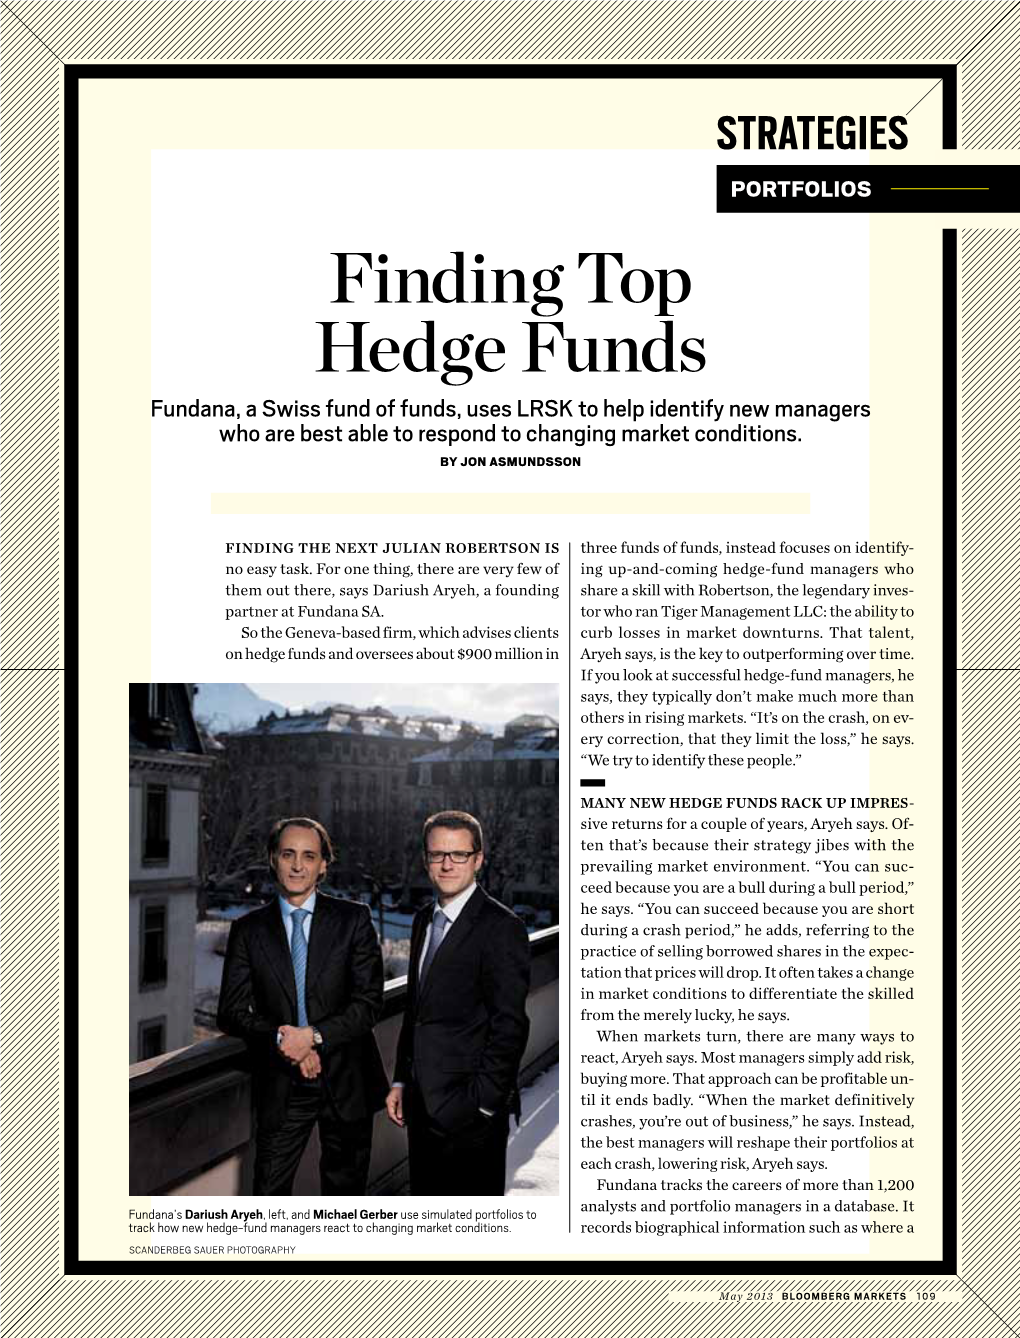 Finding Top Hedge Funds Fundana, a Swiss Fund of Funds, Uses LRSK to Help Identify New Managers Who Are Best Able to Respond to Changing Market Conditions